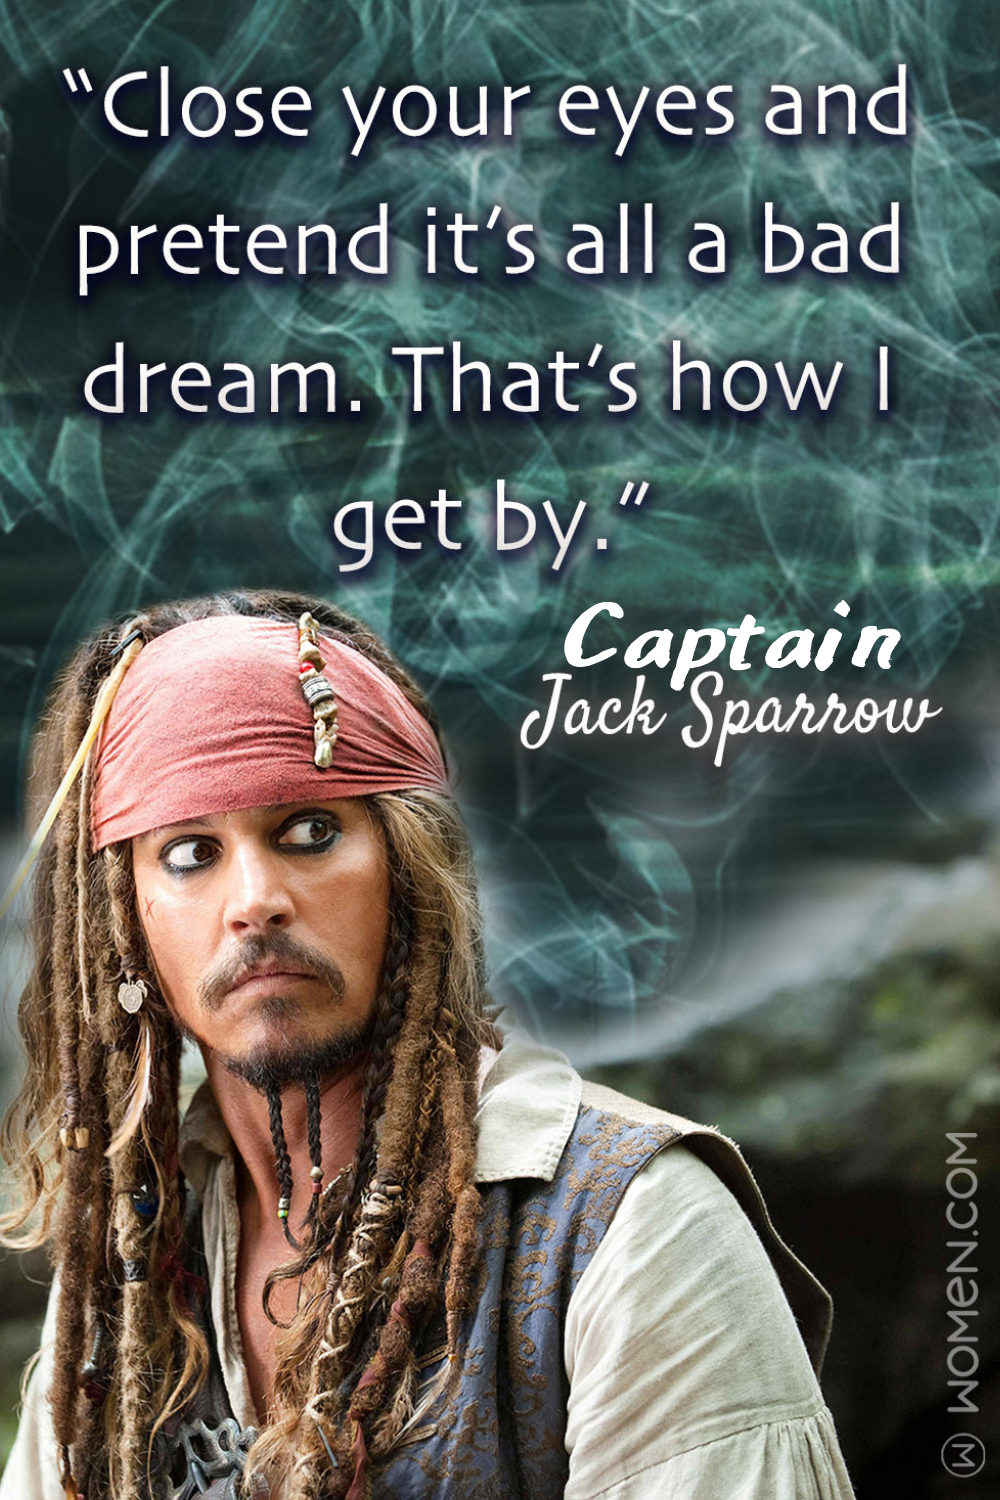 Captain Jack Sparrow Quotes That Every Pirate Should Live By. Captain jack sparrow quotes, Jack sparrow quotes, Captain jack